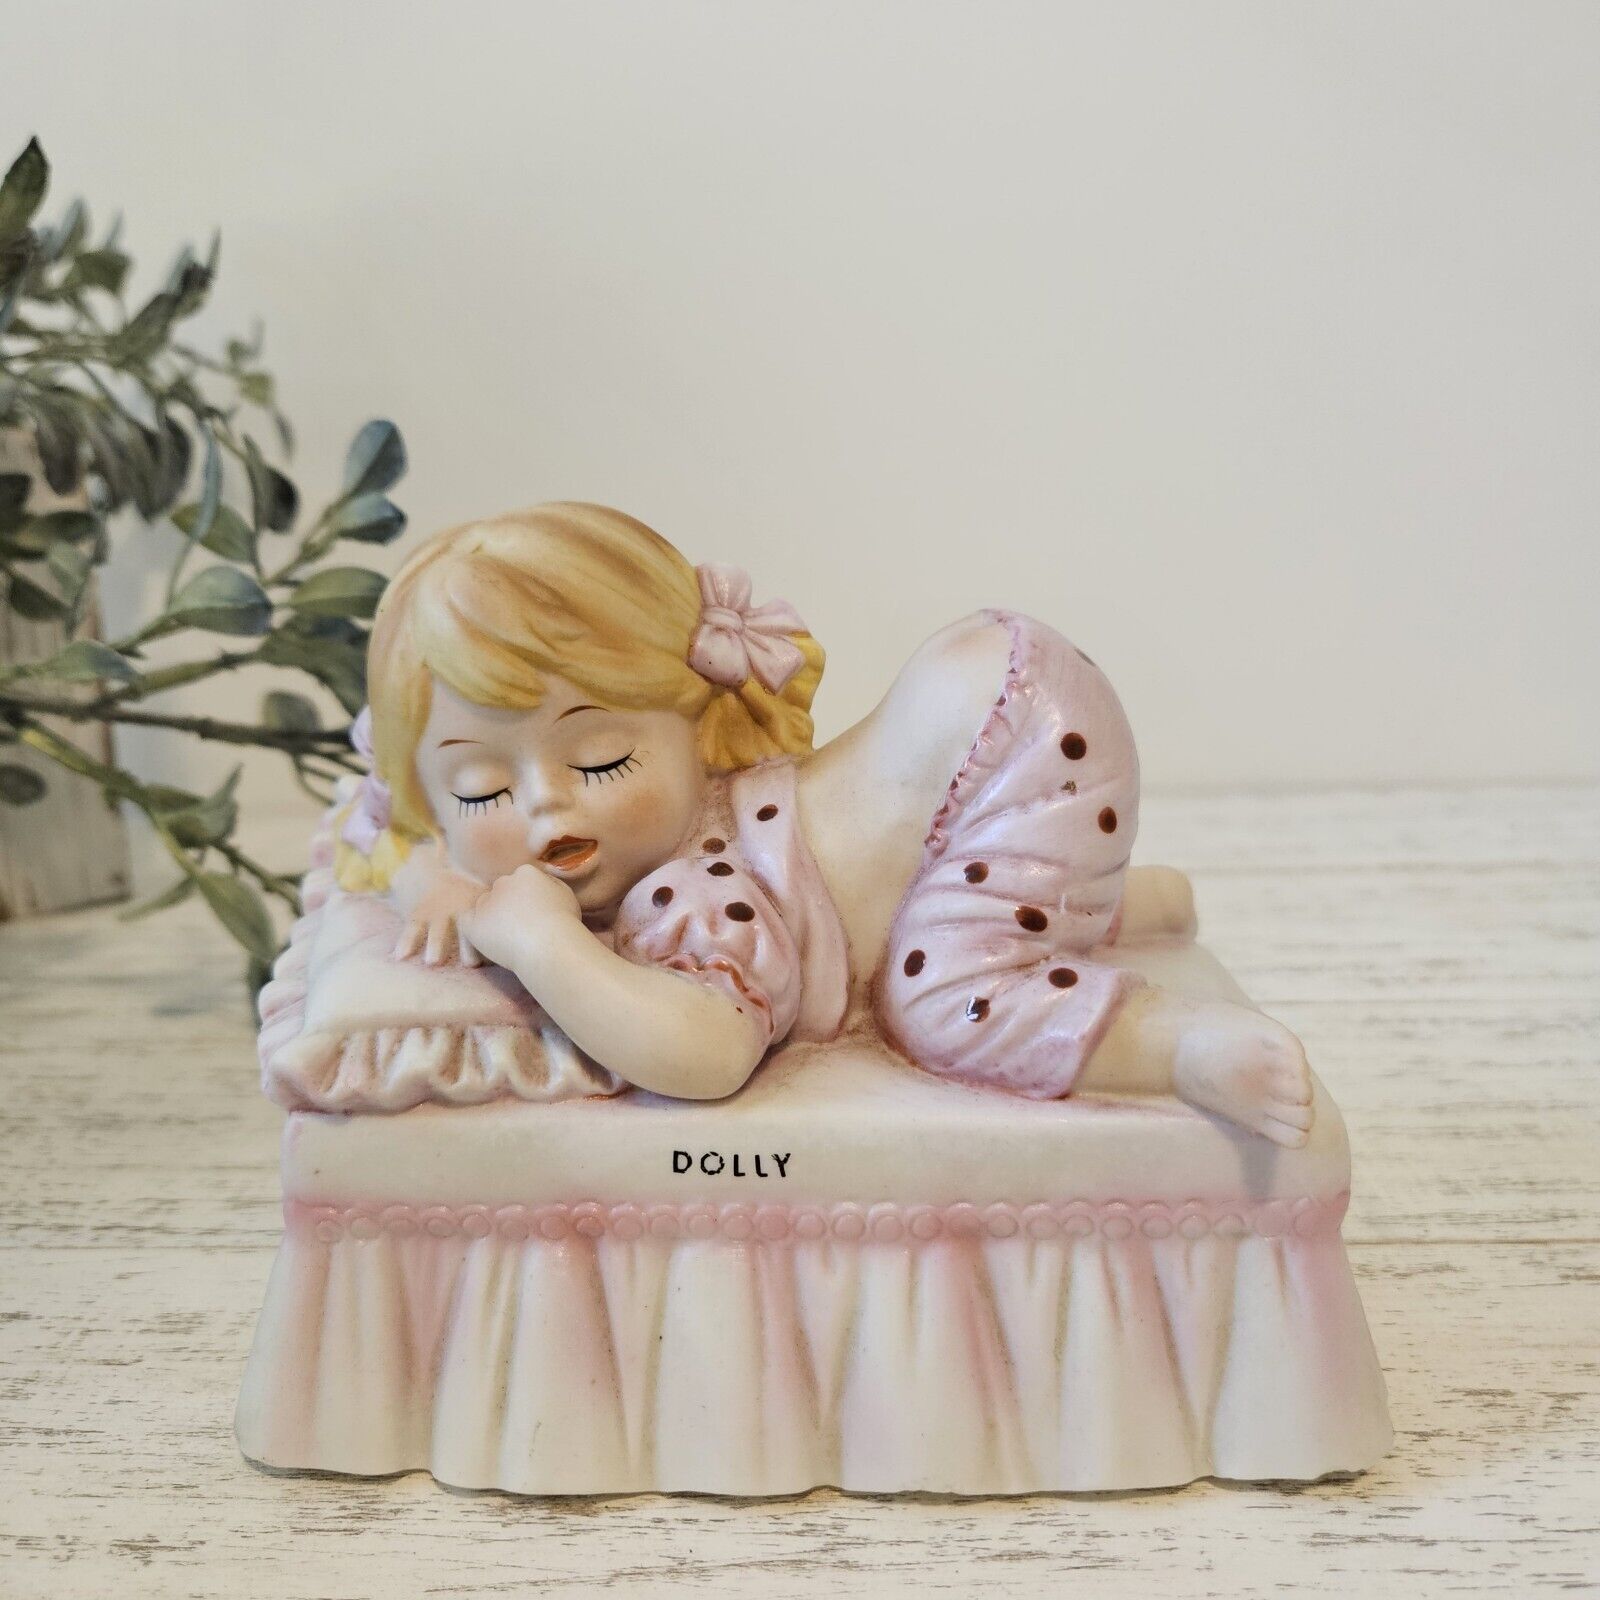 Dolly The Adorable Lefton China Hand Painted Sleeping Baby Night Light